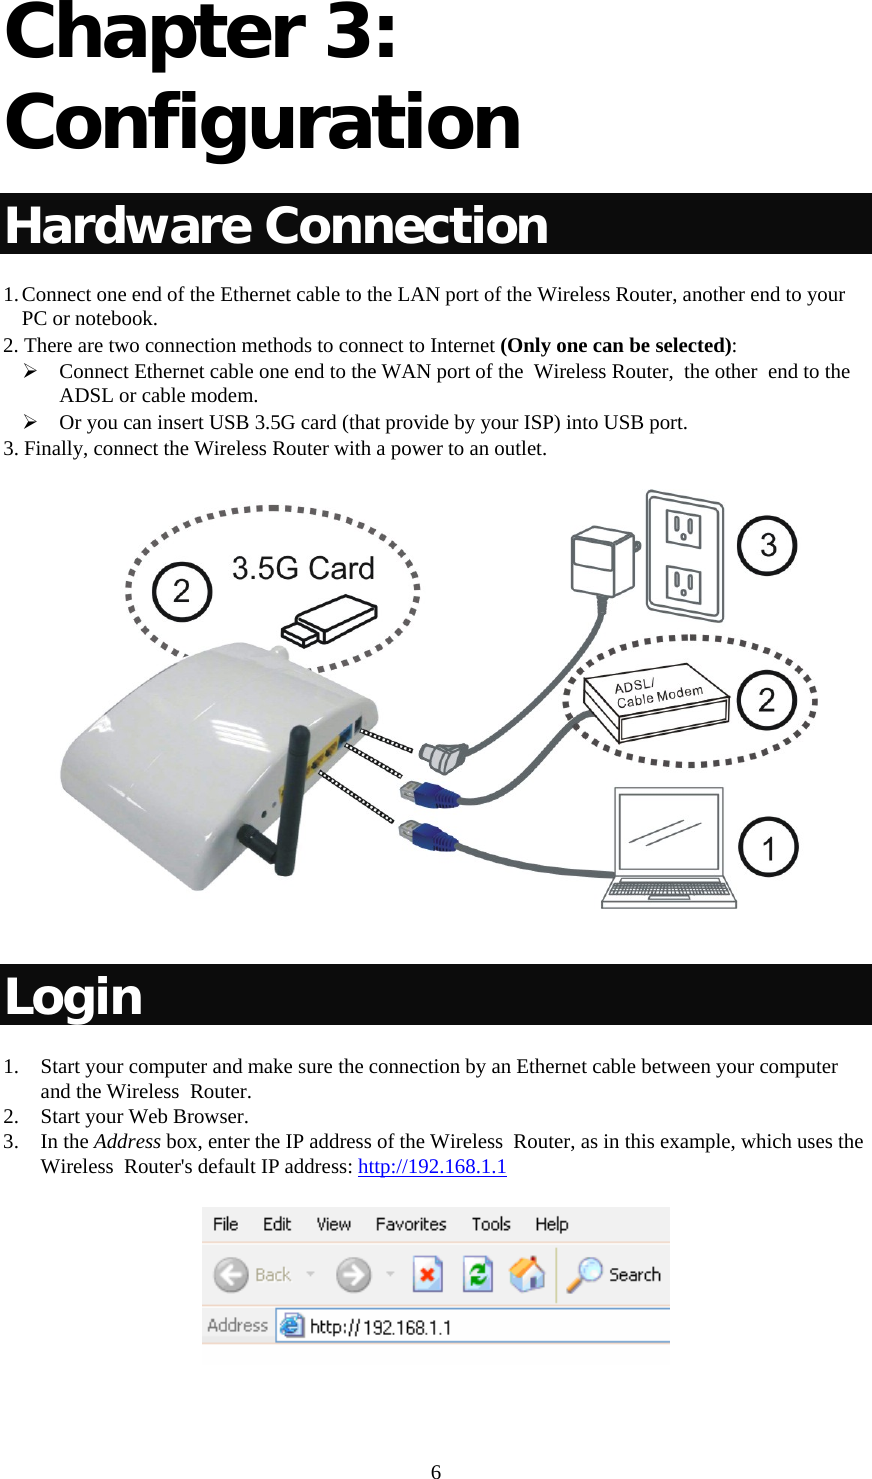   6Chapter 3: Configuration  Hardware Connection 1. Connect one end of the Ethernet cable to the LAN port of the Wireless Router, another end to your PC or notebook. 2. There are two connection methods to connect to Internet (Only one can be selected): ¾ Connect Ethernet cable one end to the WAN port of the  Wireless Router,  the other  end to the ADSL or cable modem.  ¾ Or you can insert USB 3.5G card (that provide by your ISP) into USB port. 3. Finally, connect the Wireless Router with a power to an outlet.    Login 1. Start your computer and make sure the connection by an Ethernet cable between your computer and the Wireless  Router. 2. Start your Web Browser. 3. In the Address box, enter the IP address of the Wireless  Router, as in this example, which uses the Wireless  Router&apos;s default IP address: http://192.168.1.1  